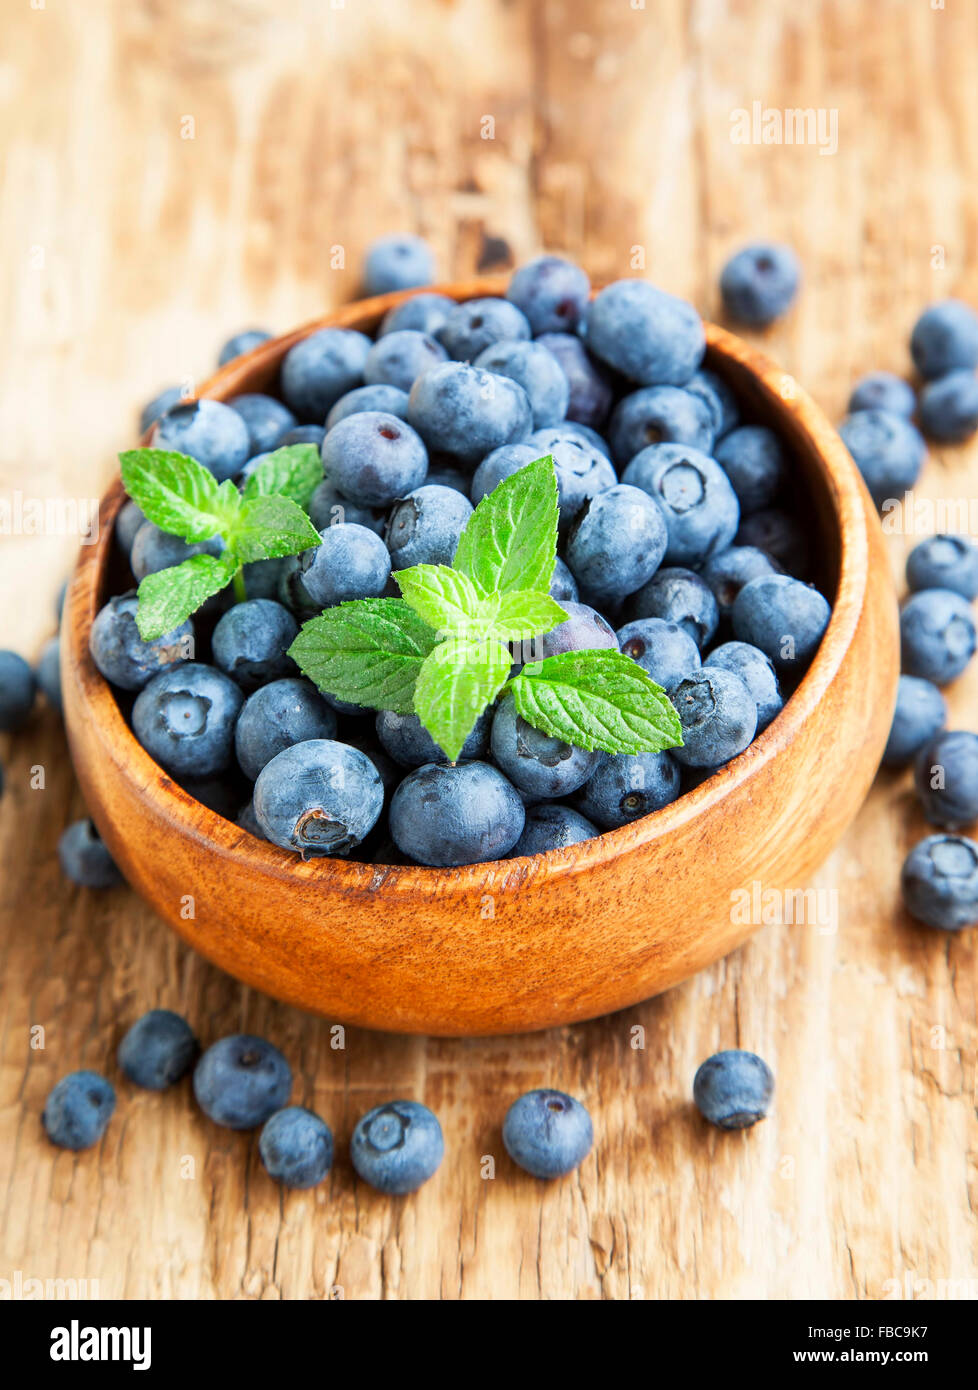 Blueberries Fruits in a Wooden Bowl with Mint Leaf Stock Photo